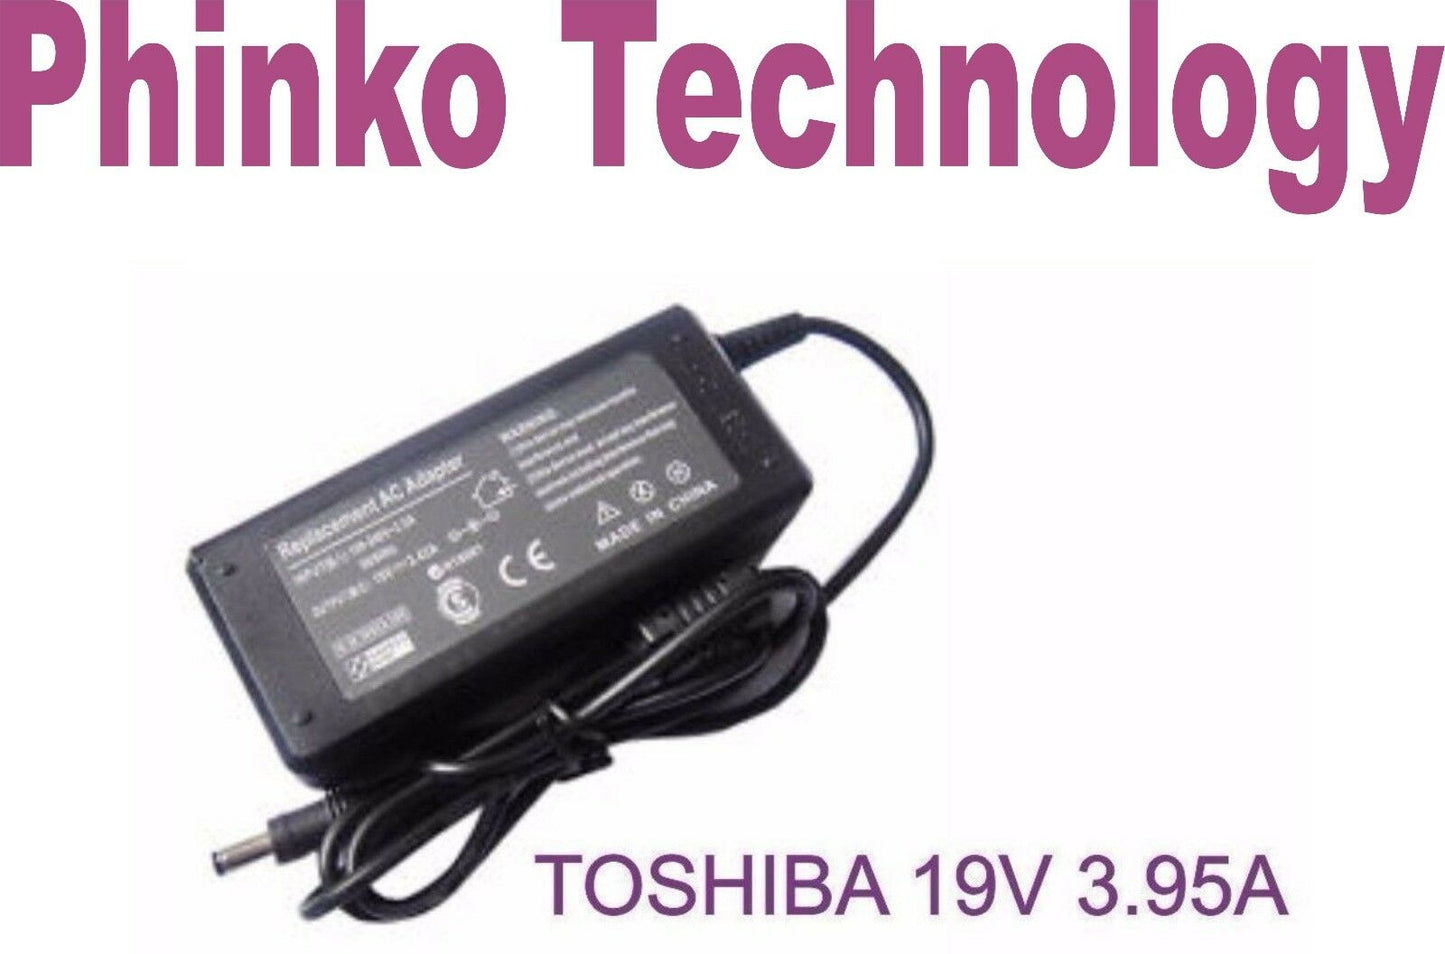 Adapter Laptop Charger for Toshiba Satellite C850 C850D, 19V 3.95A